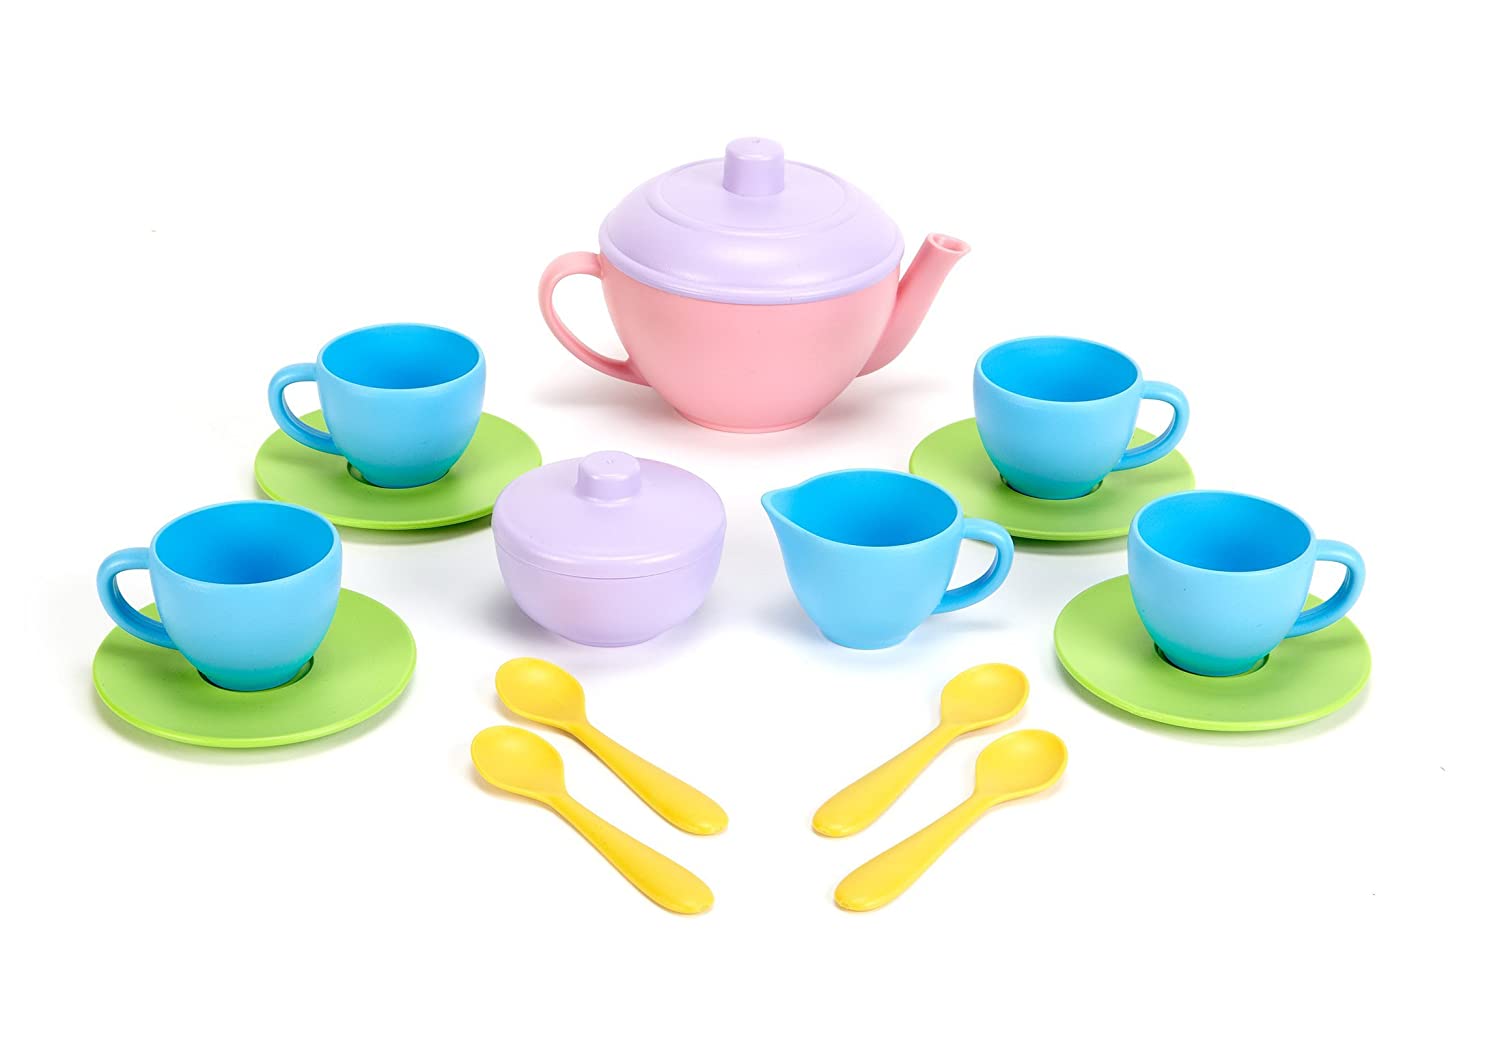 9 Best Kids Tea Sets 2023 - Buying Guide & Reviews 1